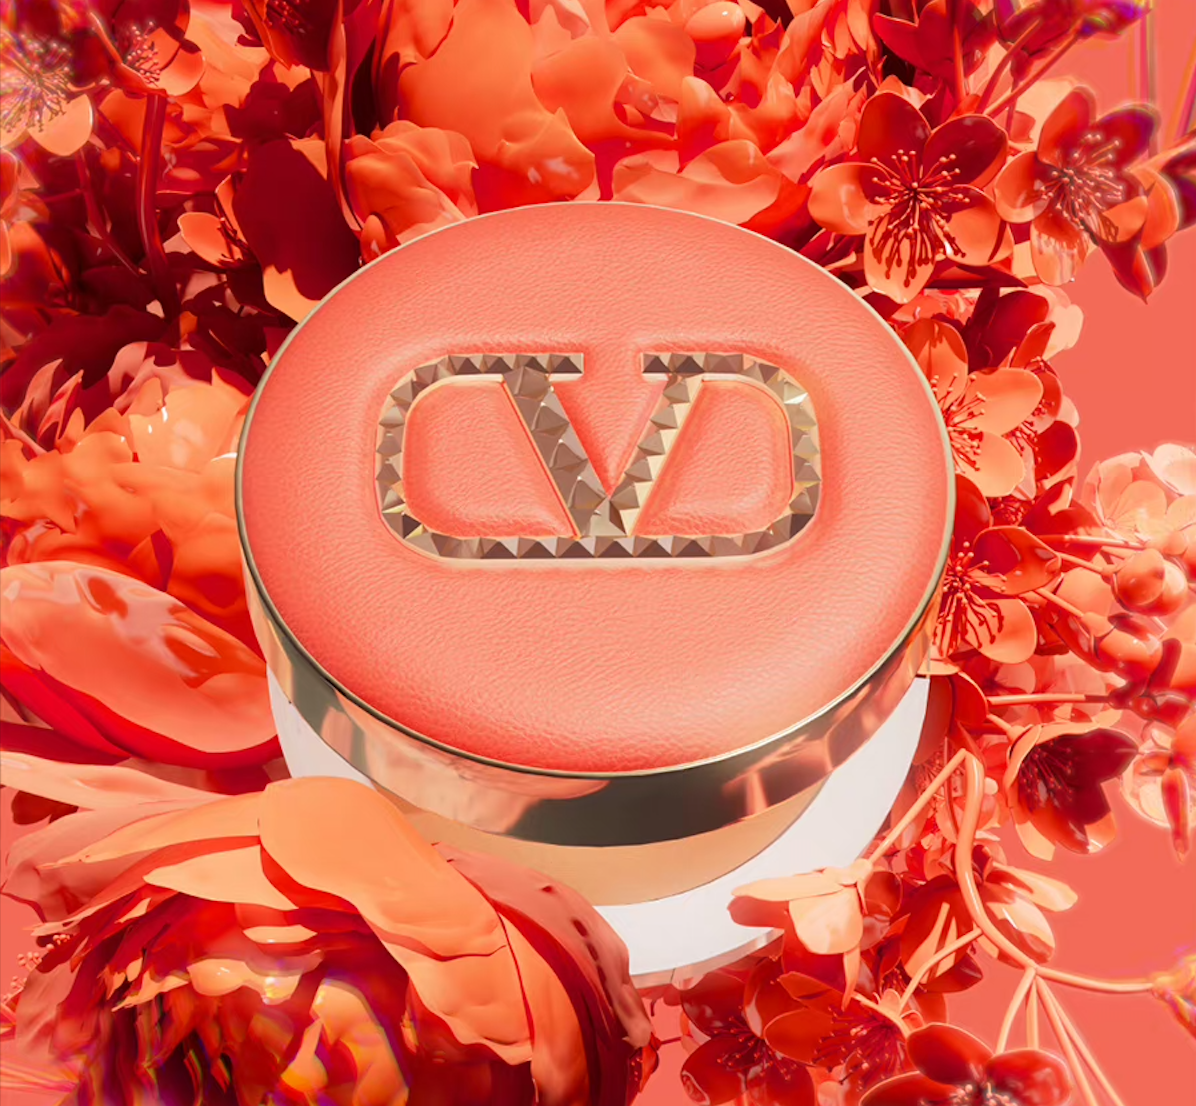 This year, Valentino, known for its mastery of color, has launched a limited edition orange beauty gift box called “Warm Sun” (暖阳). Image: Valentino